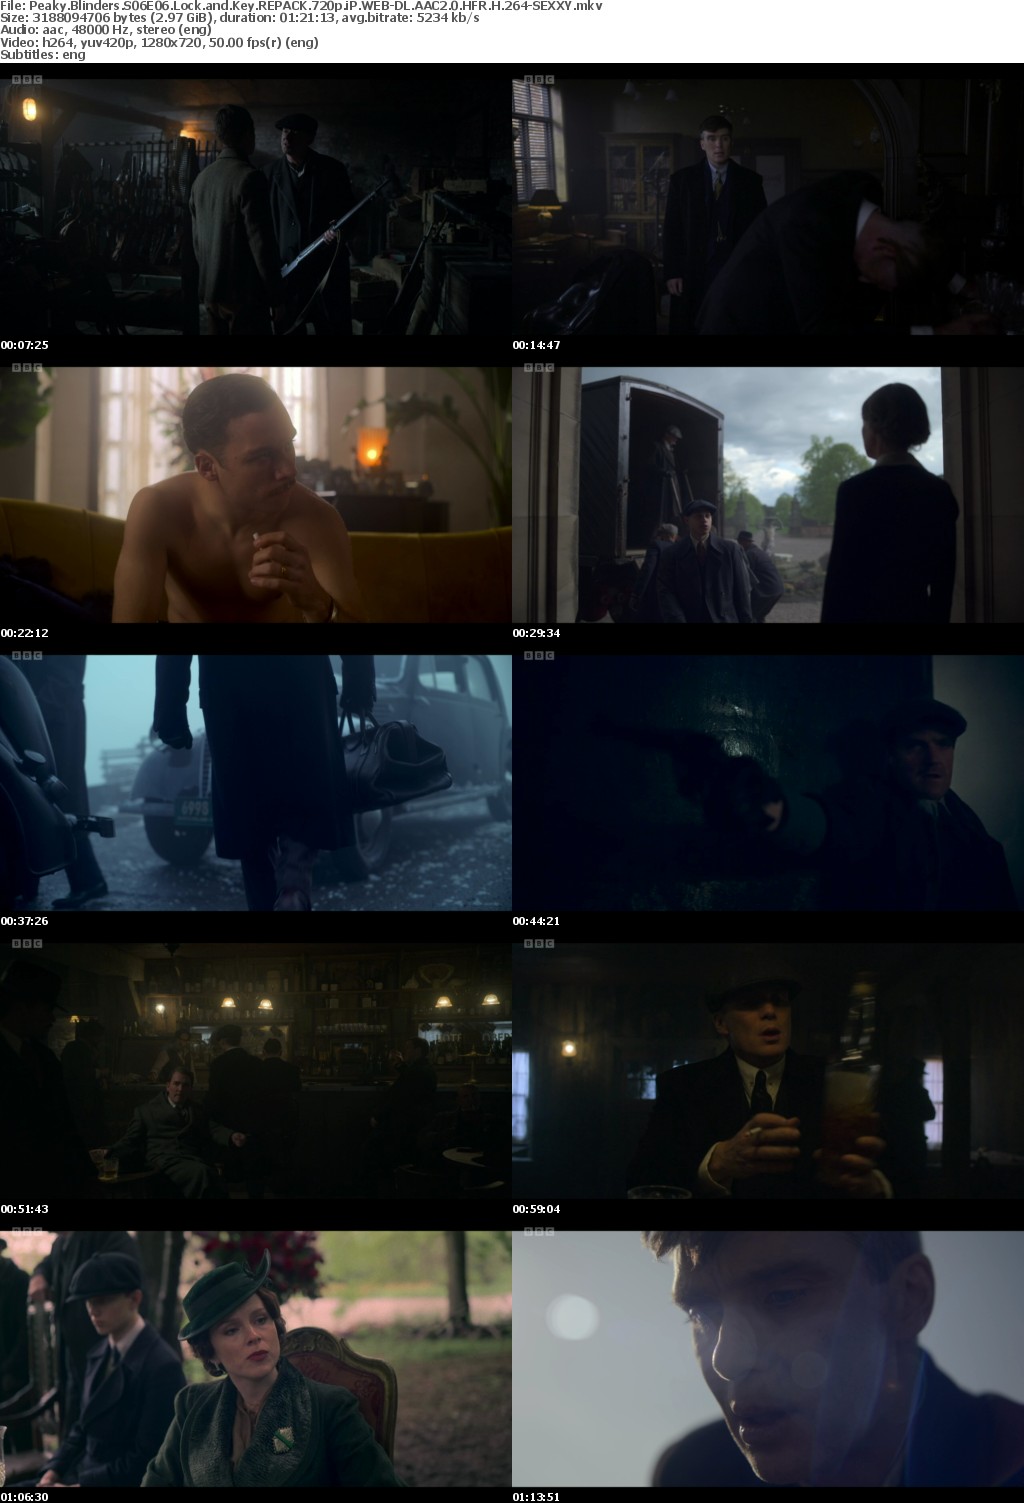 Peaky Blinders S06E06 Lock and Key REPACK 720p iP WEB-DL AAC2 0 HFR H 264-SEXXY